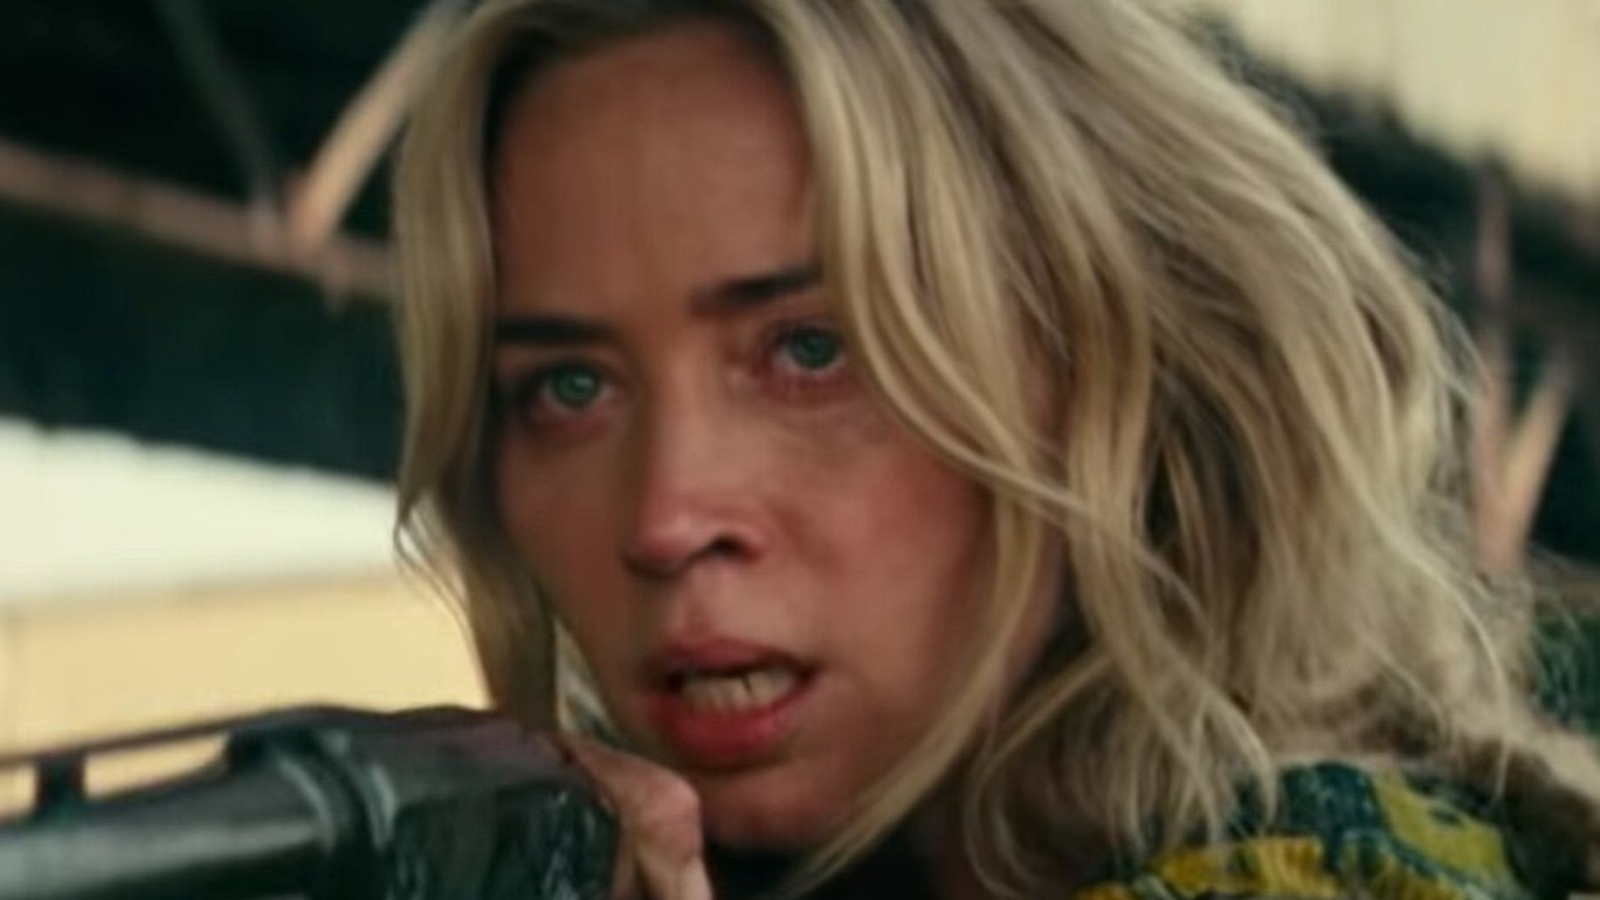 where can i watch a quiet place 2